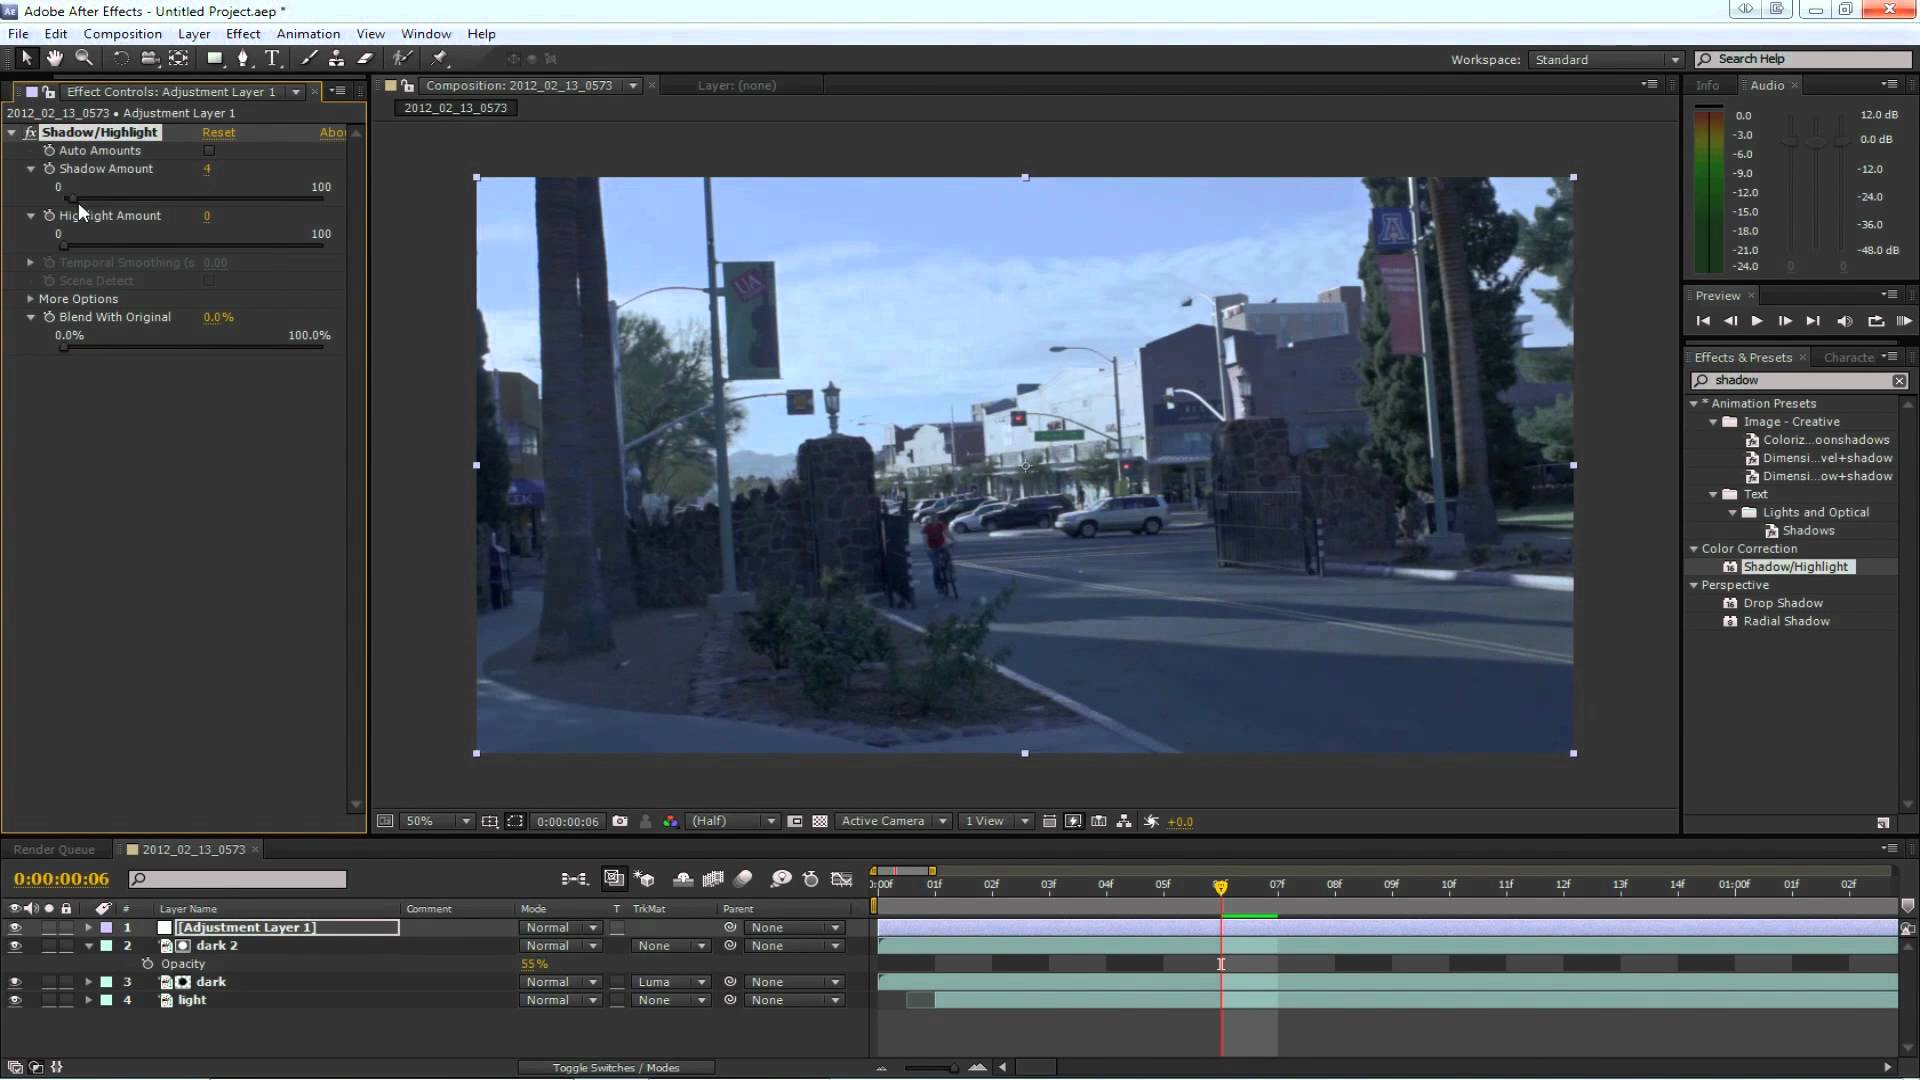 After Effects Tutorial: Magic Lantern HDR Workflow (with Twixtor)